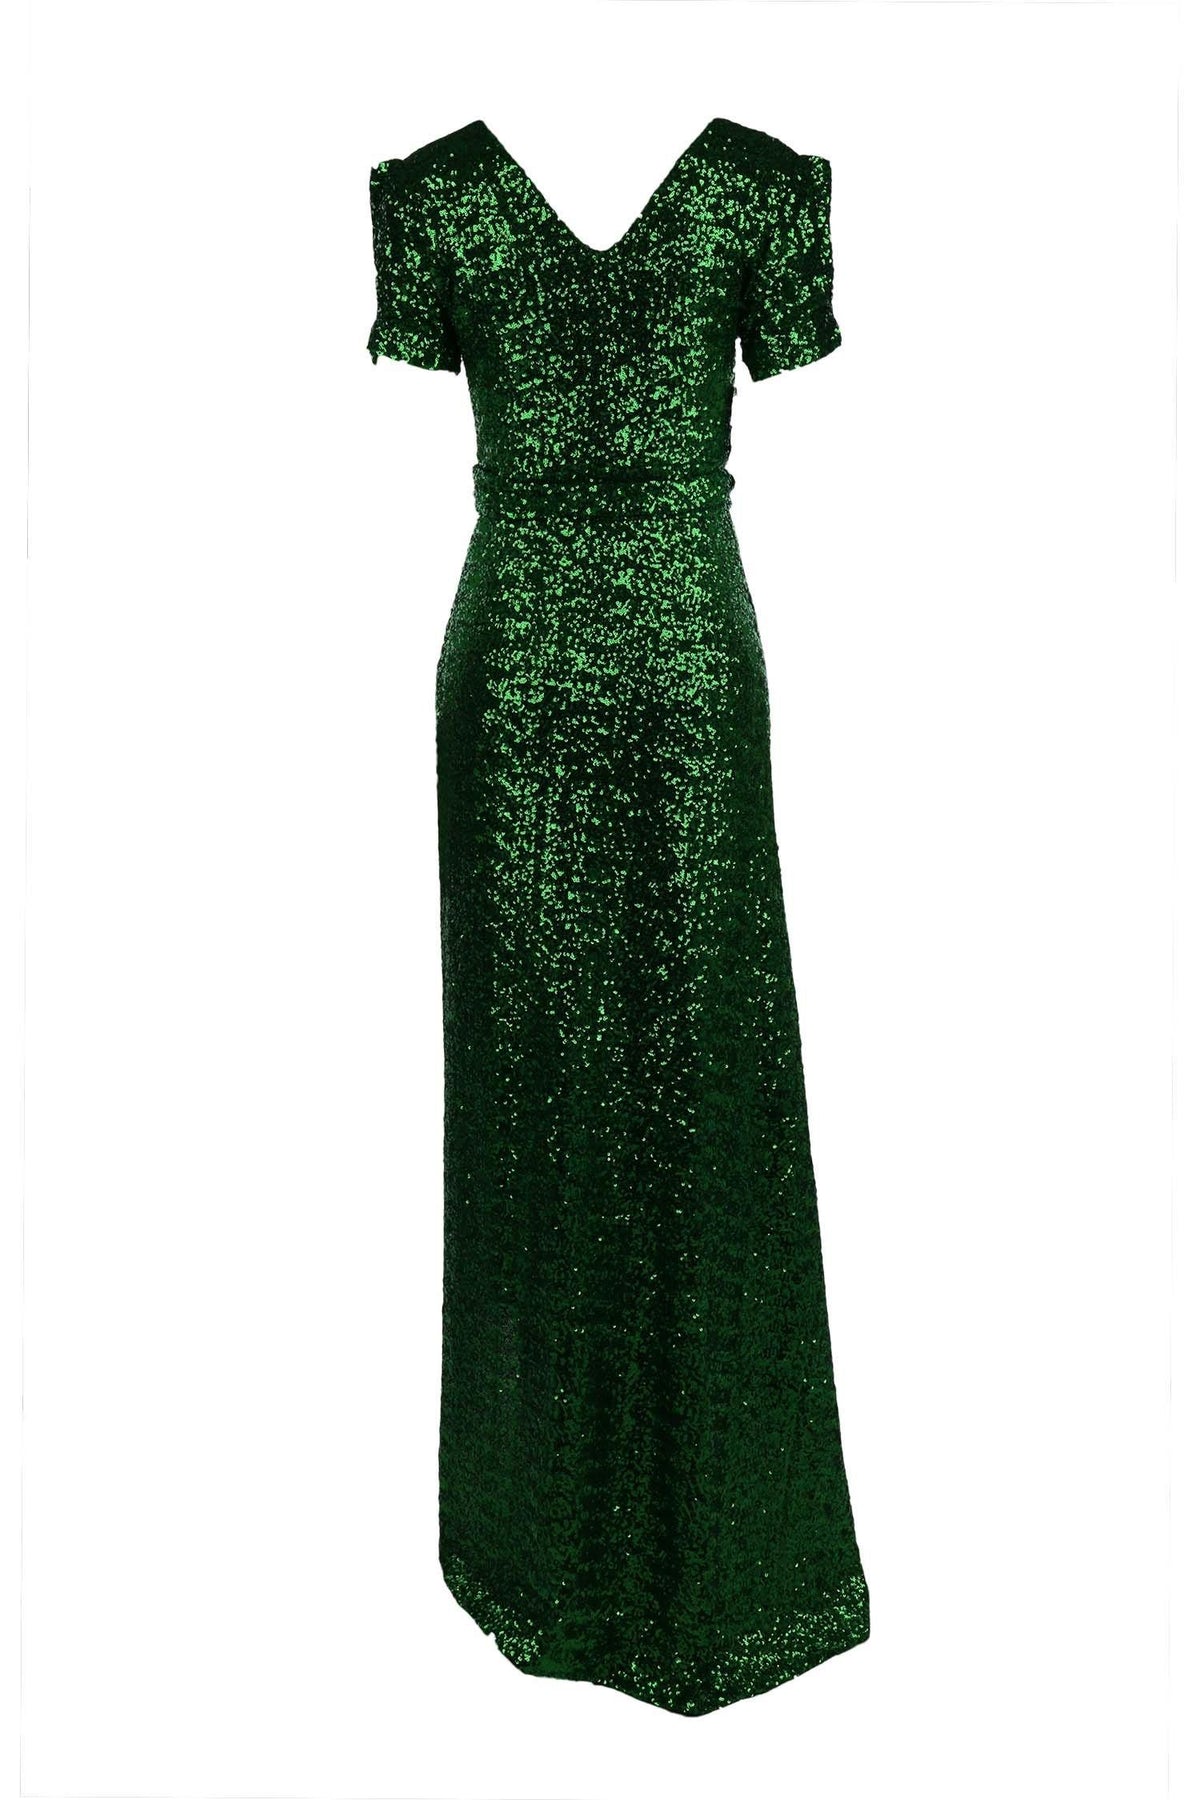 Viva Gown in Green Sequin by Lucy Laurita - Leiela